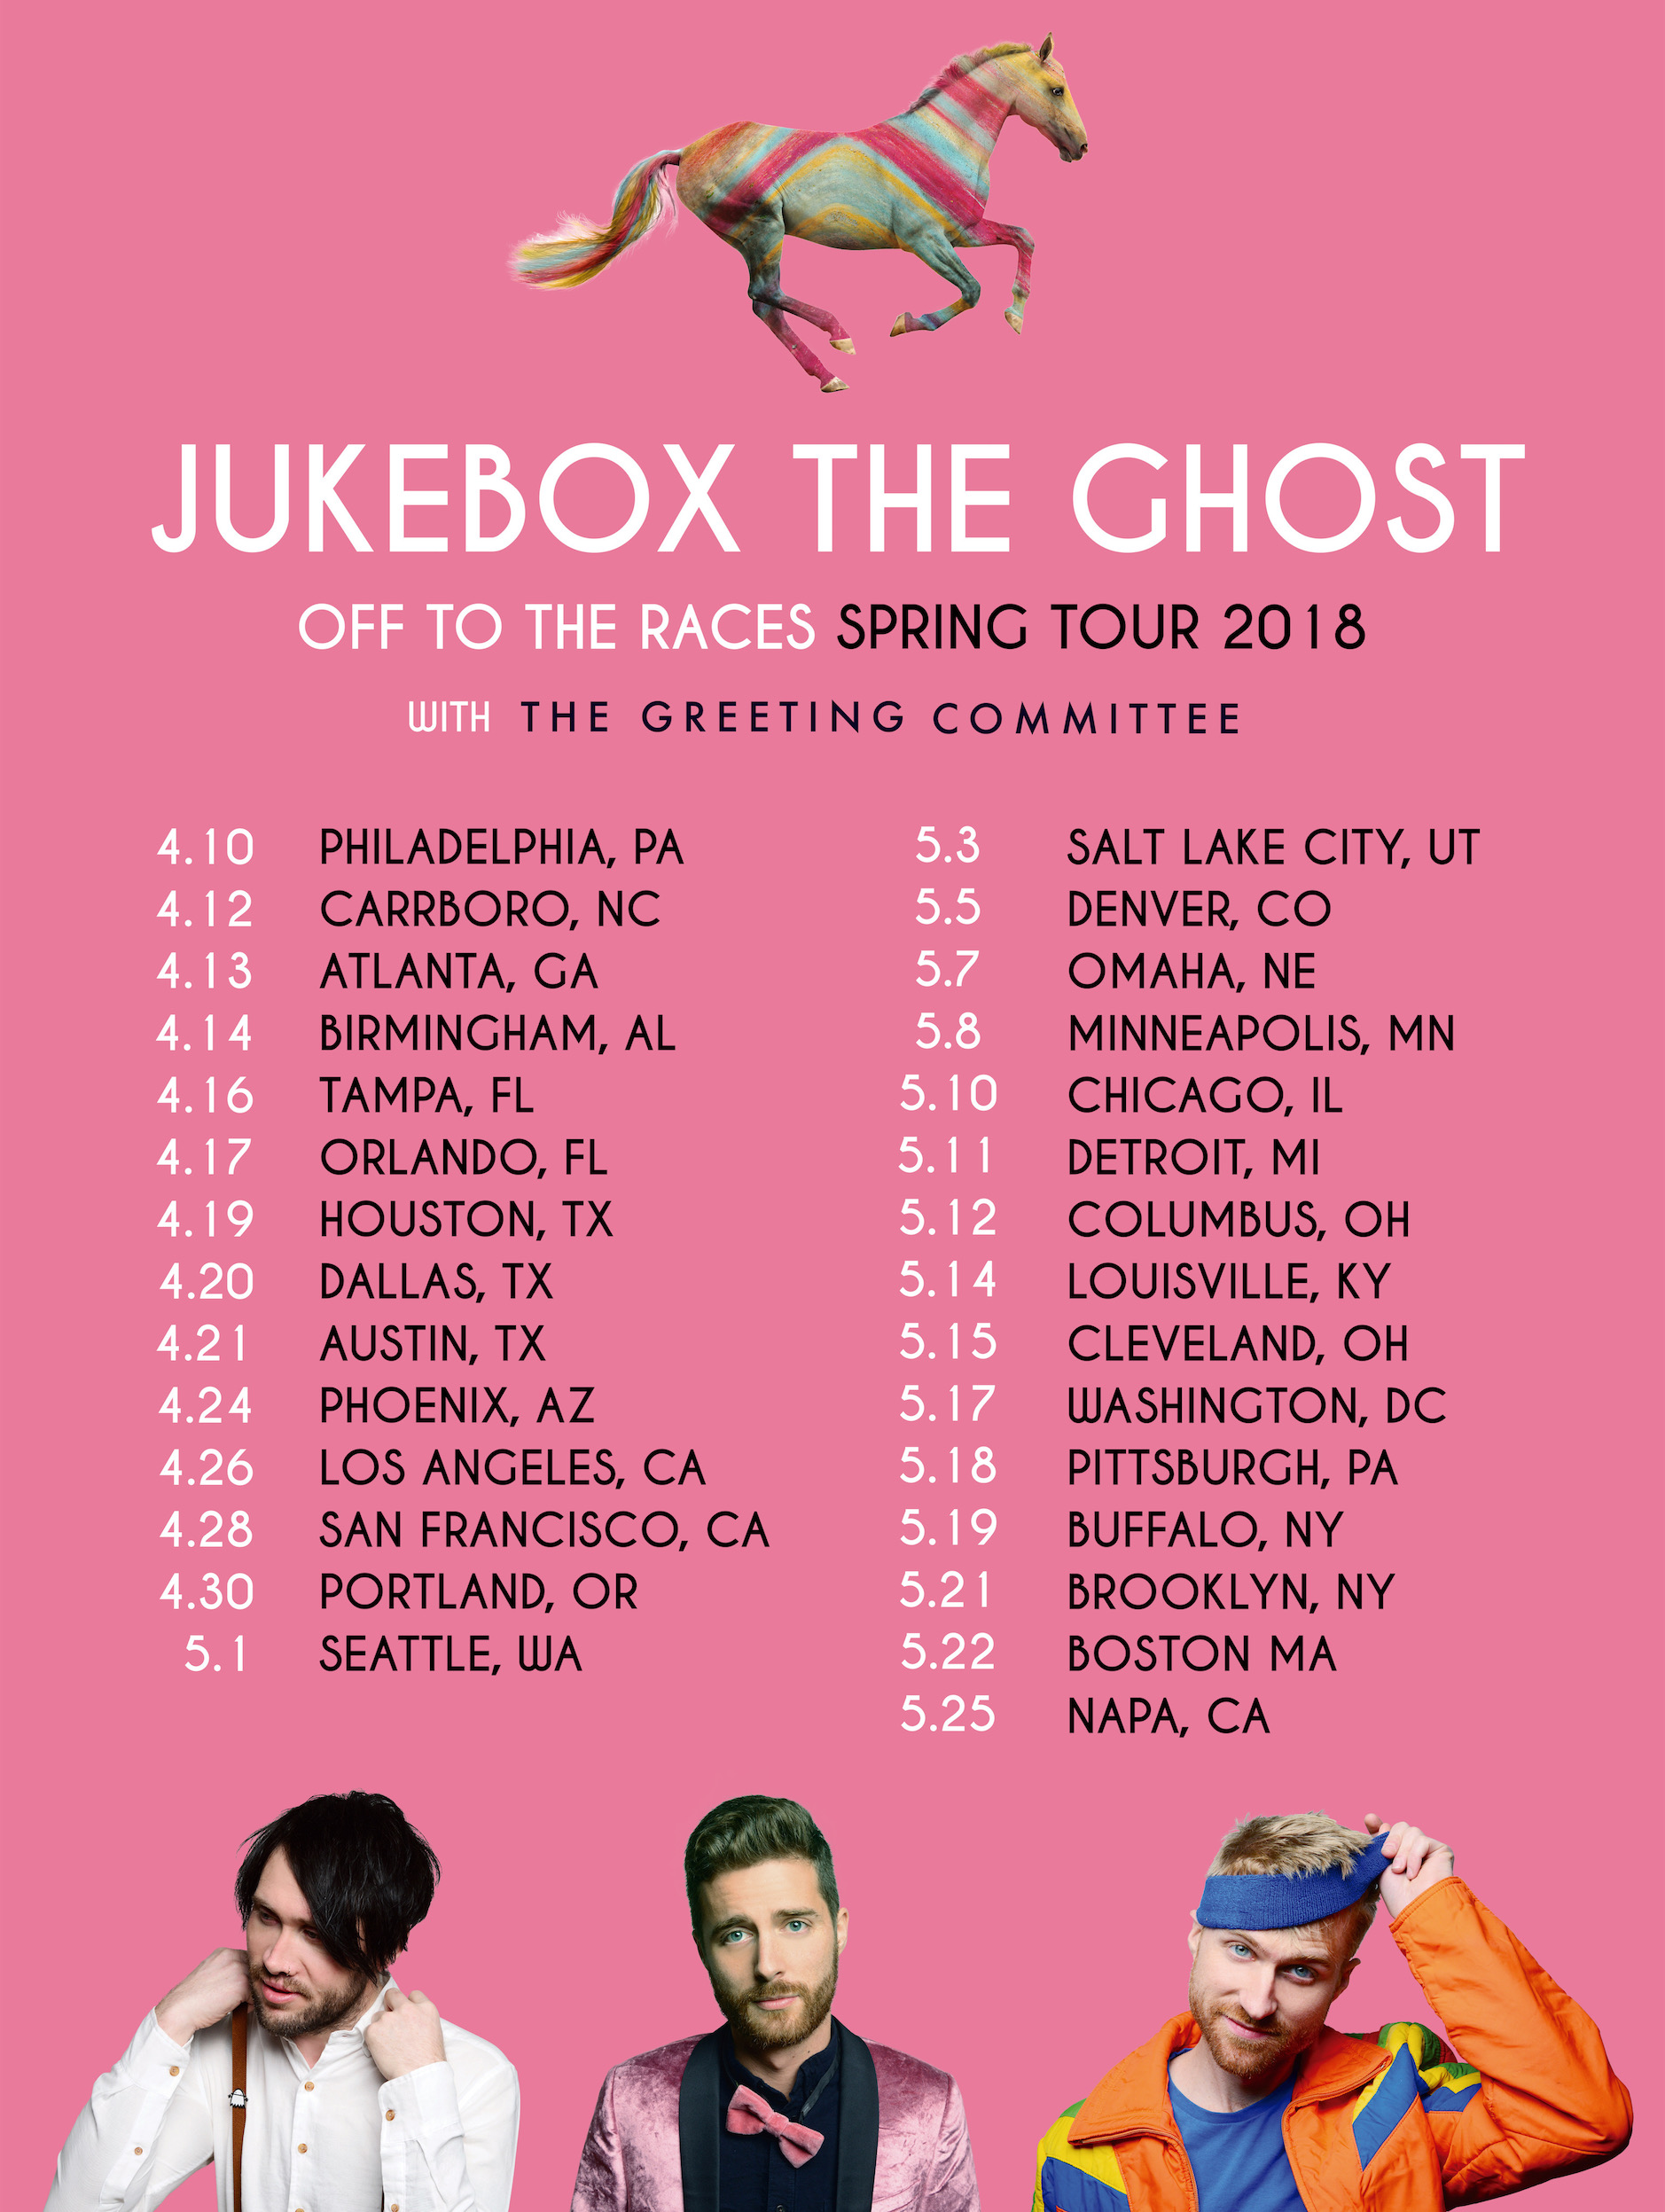 TourHappens With…Jukebox The Ghost High Voltage Magazine